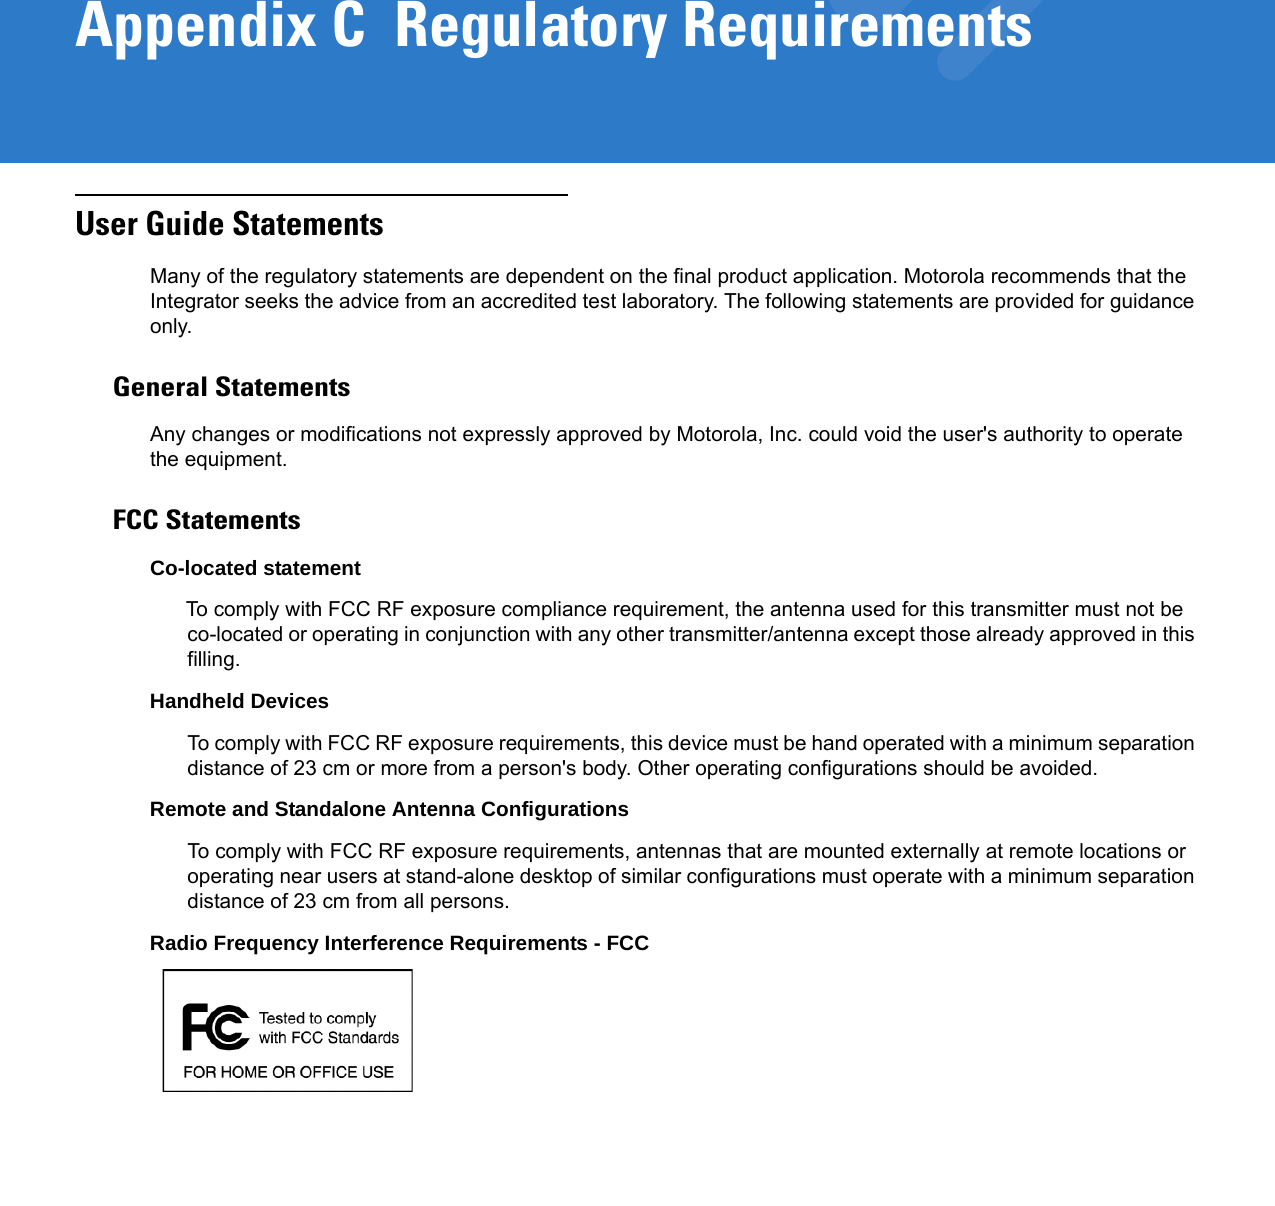 Appendix C  Regulatory RequirementsUser Guide StatementsMany of the regulatory statements are dependent on the final product application. Motorola recommends that the Integrator seeks the advice from an accredited test laboratory. The following statements are provided for guidance only.General StatementsAny changes or modifications not expressly approved by Motorola, Inc. could void the user&apos;s authority to operate the equipment.FCC StatementsCo-located statementTo comply with FCC RF exposure compliance requirement, the antenna used for this transmitter must not be co-located or operating in conjunction with any other transmitter/antenna except those already approved in this filling.Handheld DevicesTo comply with FCC RF exposure requirements, this device must be hand operated with a minimum separation distance of 23 cm or more from a person&apos;s body. Other operating configurations should be avoided.Remote and Standalone Antenna ConfigurationsTo comply with FCC RF exposure requirements, antennas that are mounted externally at remote locations or operating near users at stand-alone desktop of similar configurations must operate with a minimum separation distance of 23 cm from all persons.Radio Frequency Interference Requirements - FCC 